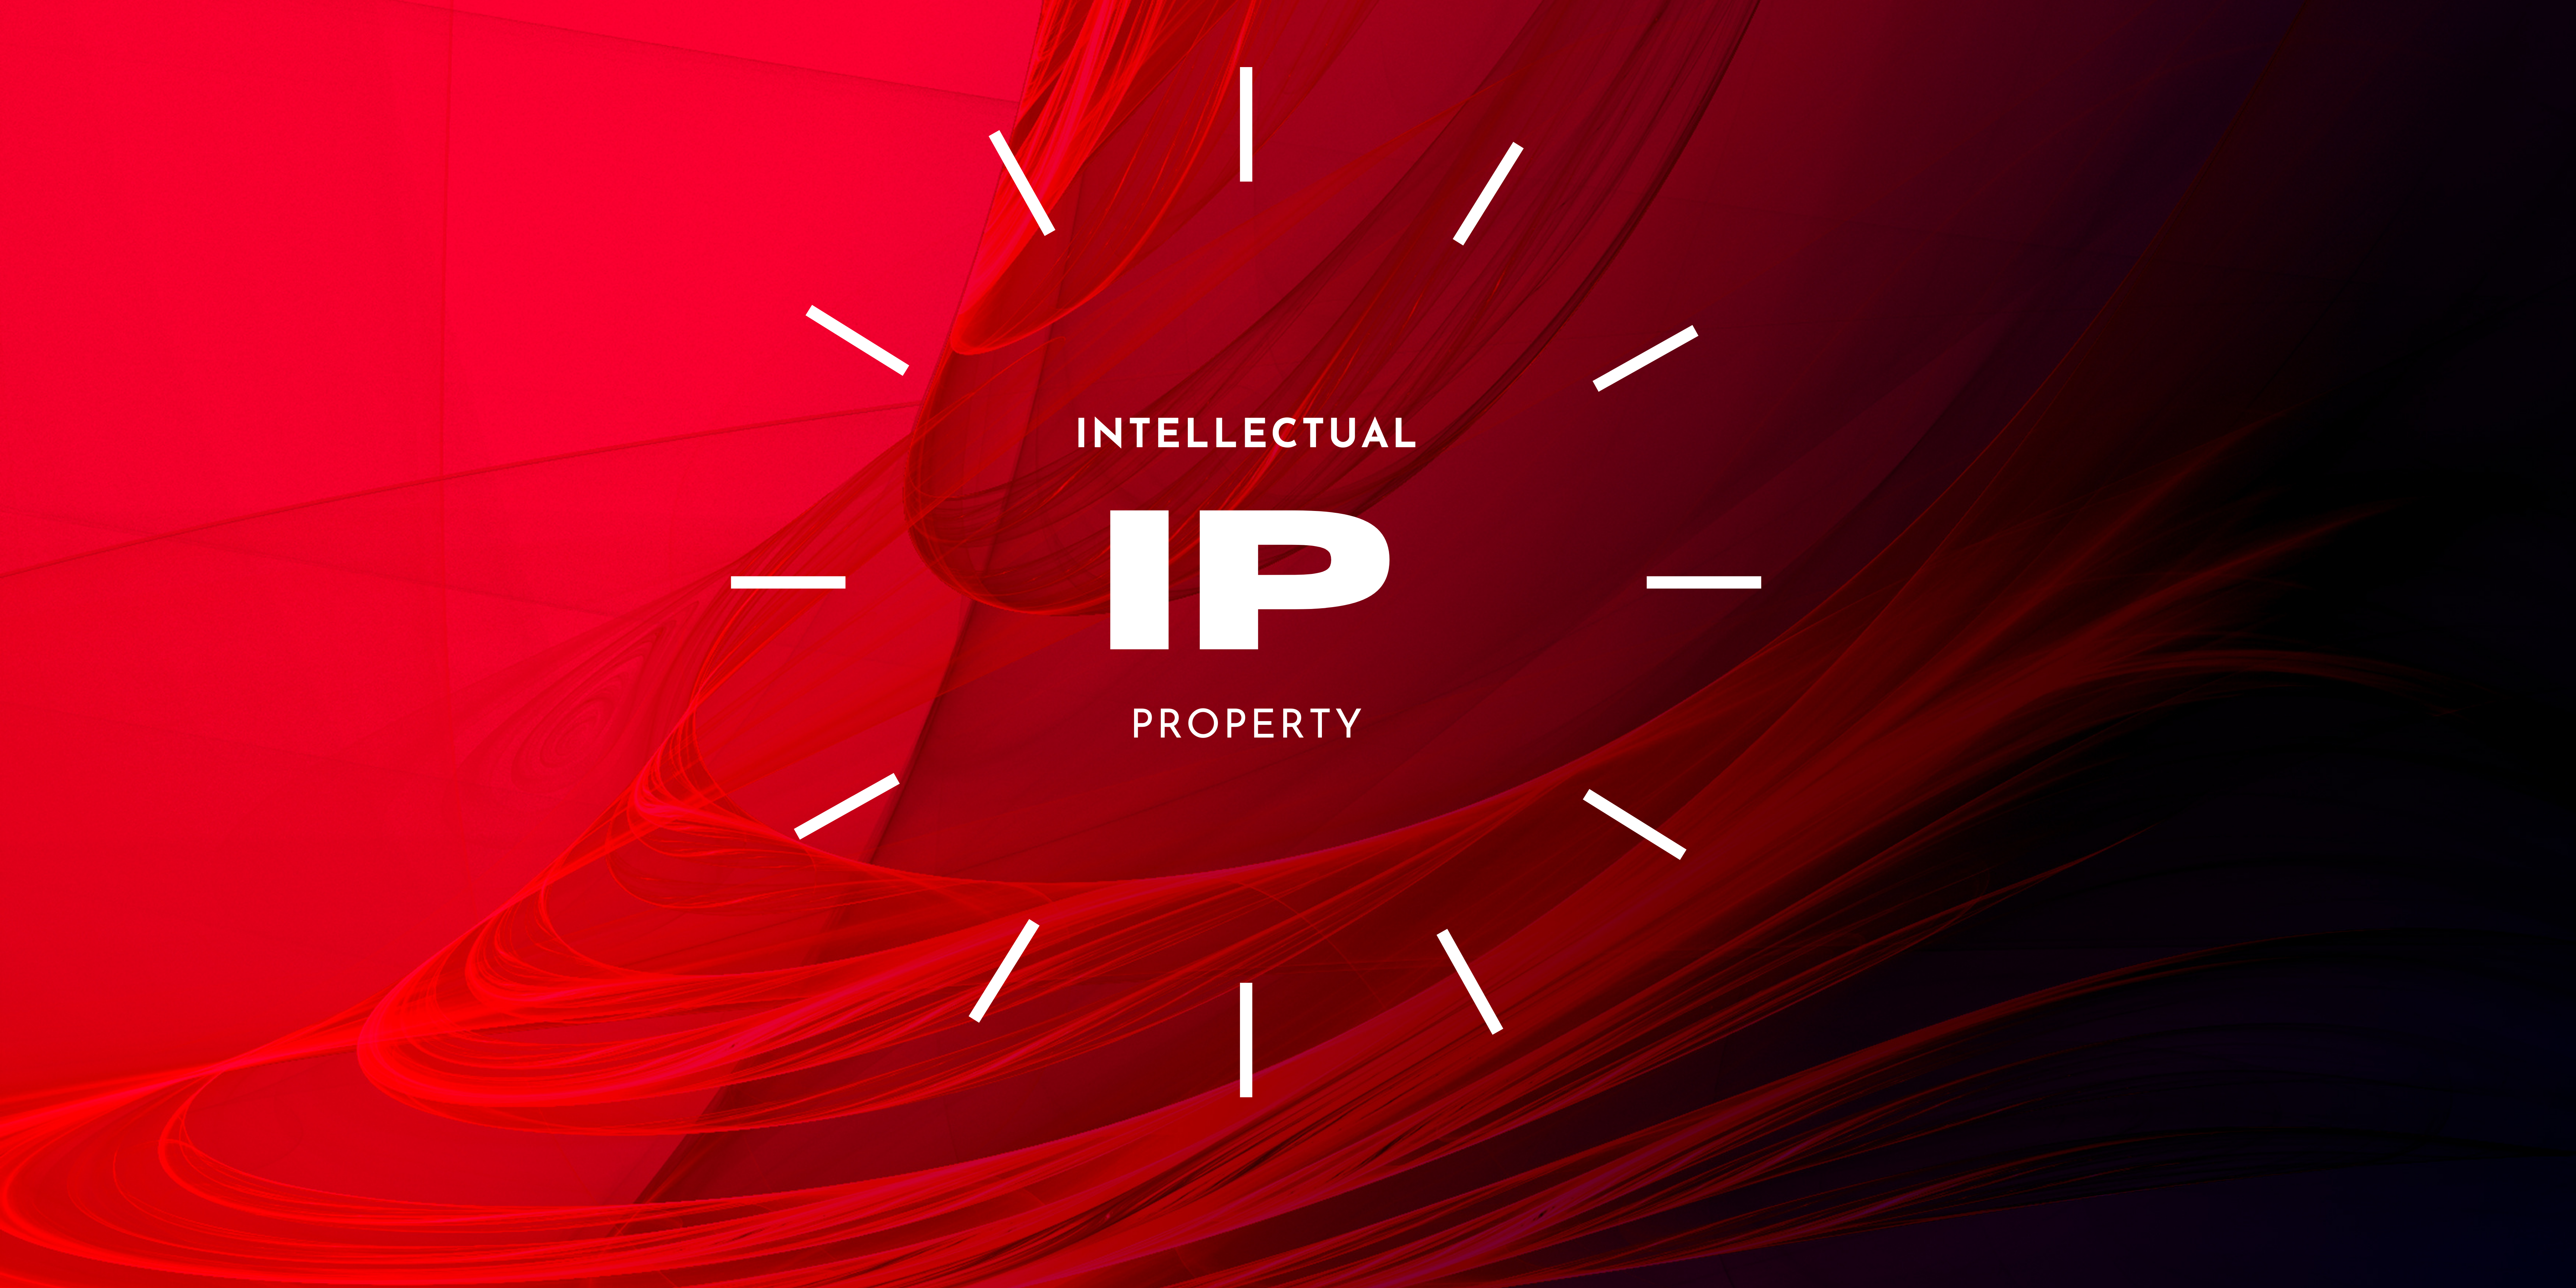 Overview of IP Rights: What You Need to Know